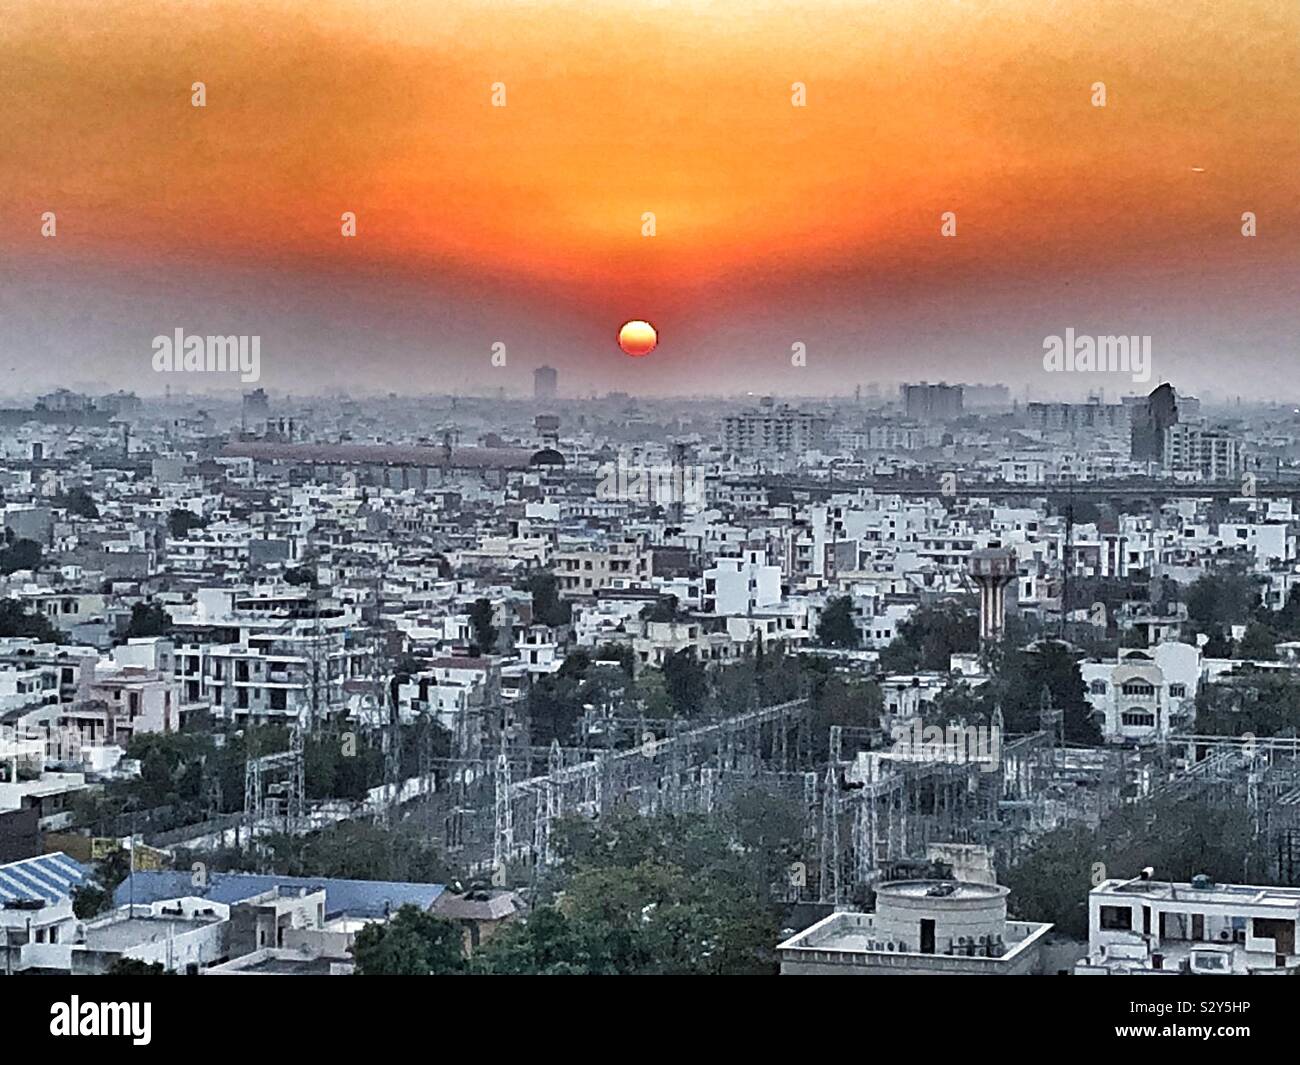 Sunset over city in India Stock Photo